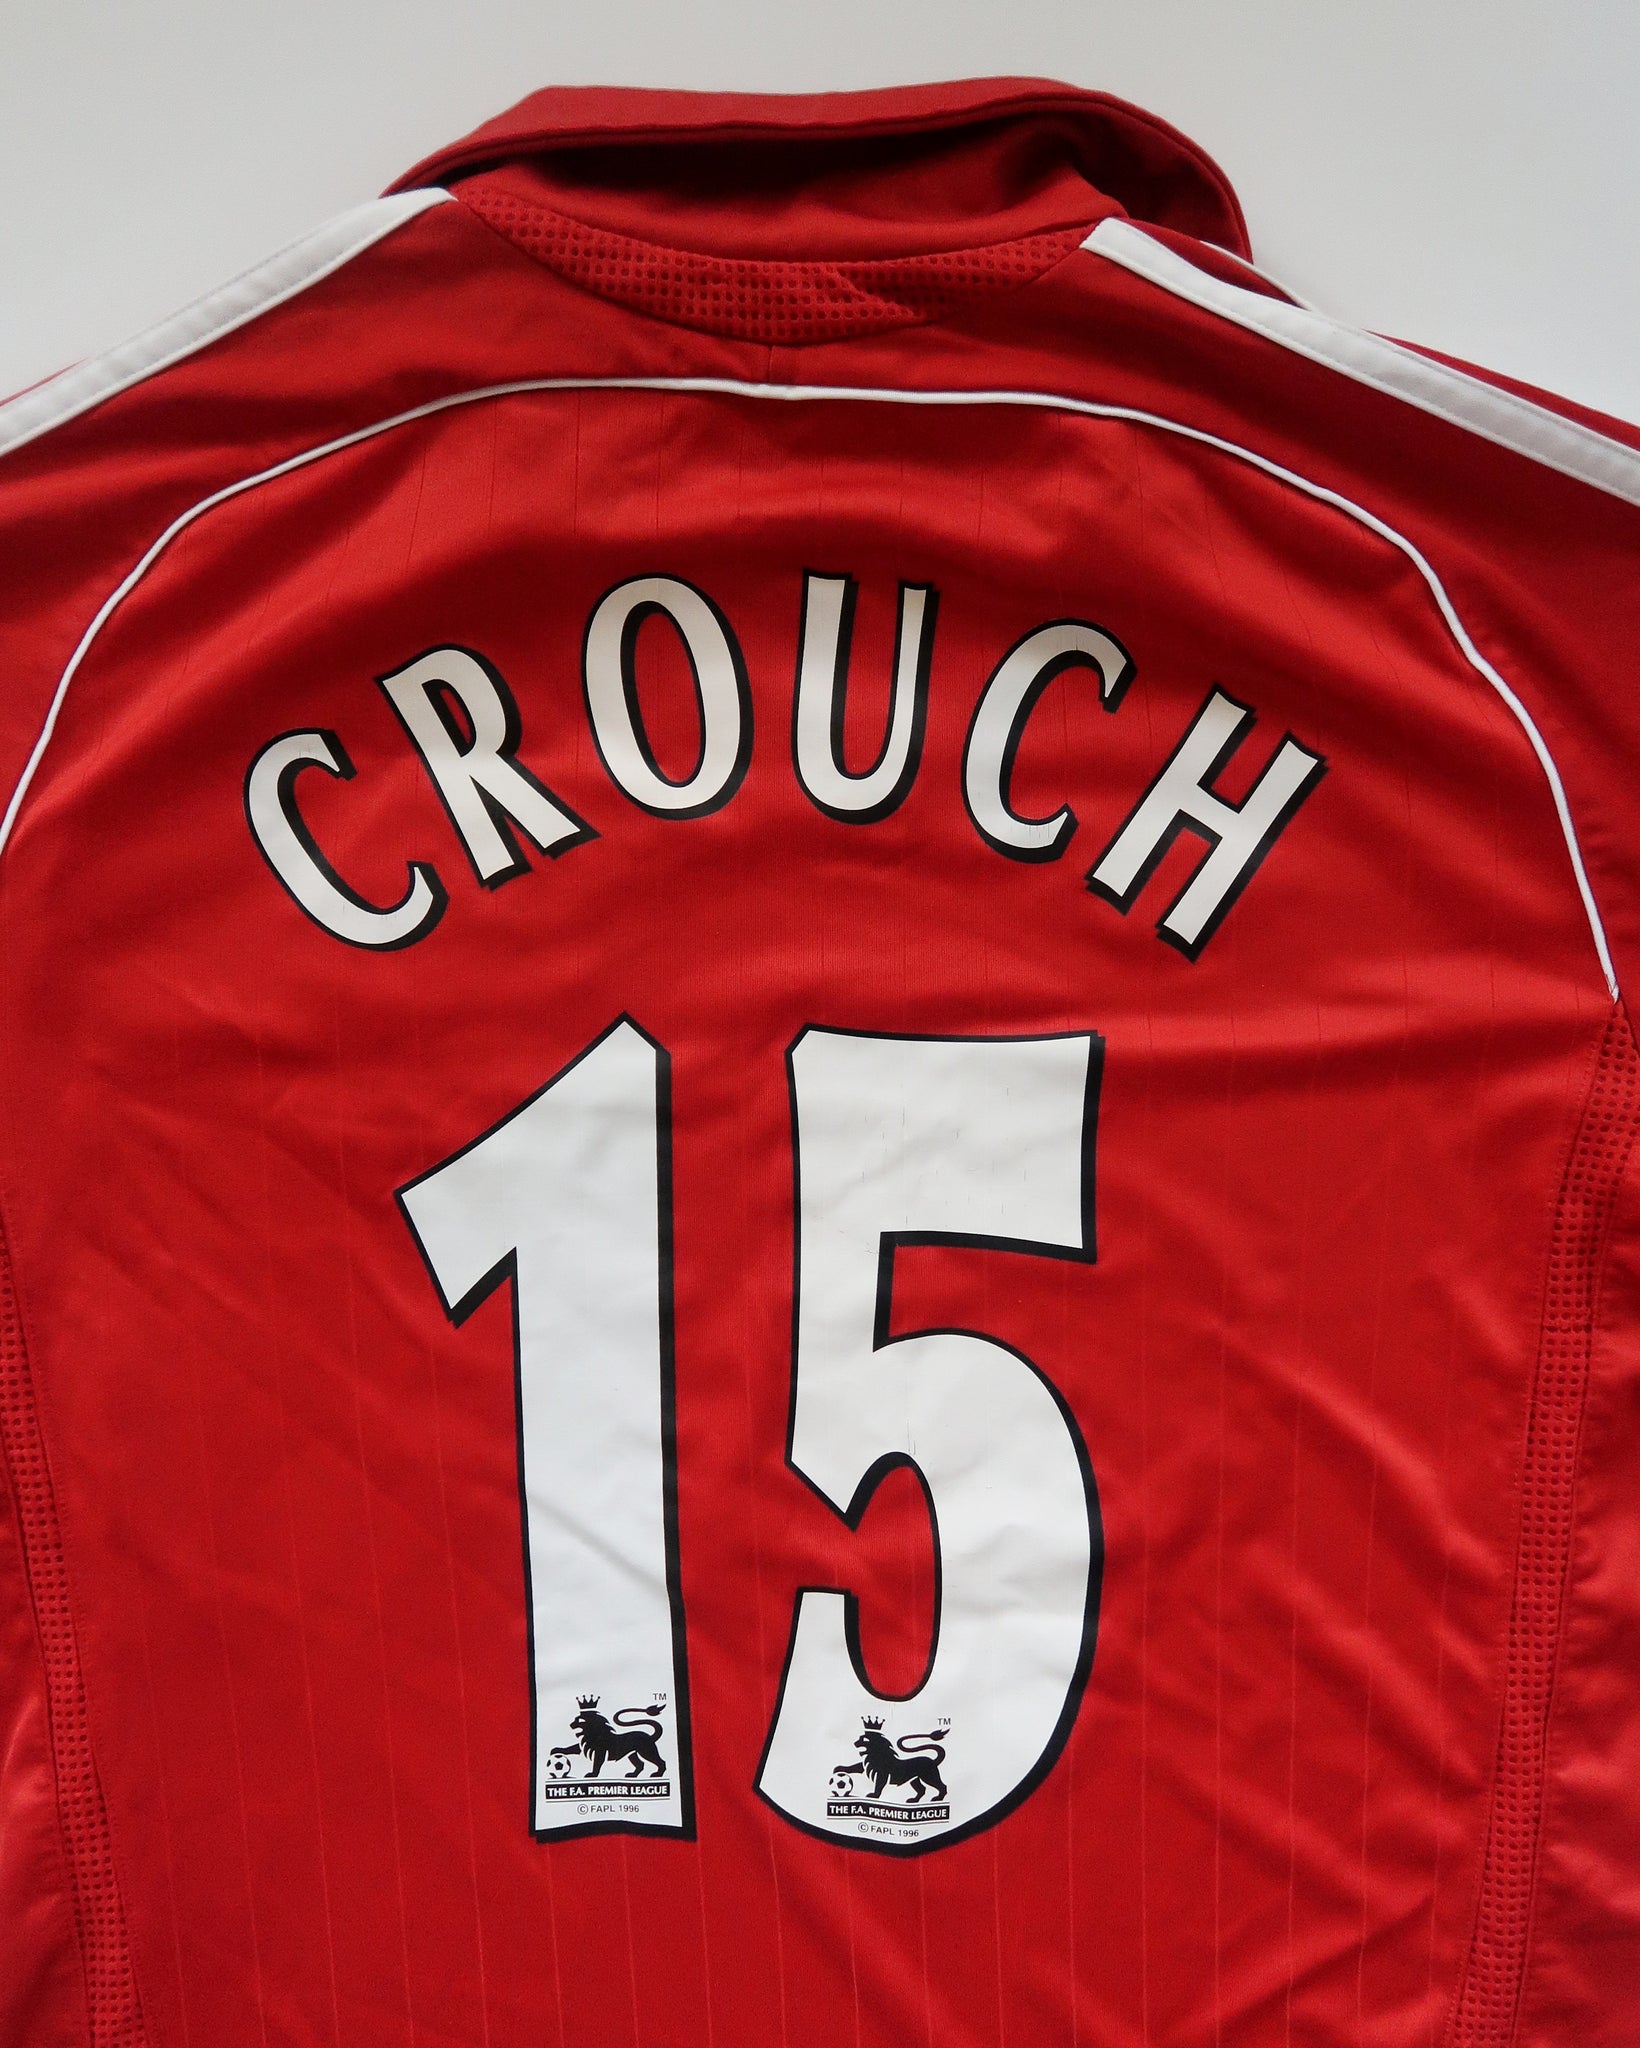 peter crouch jersey